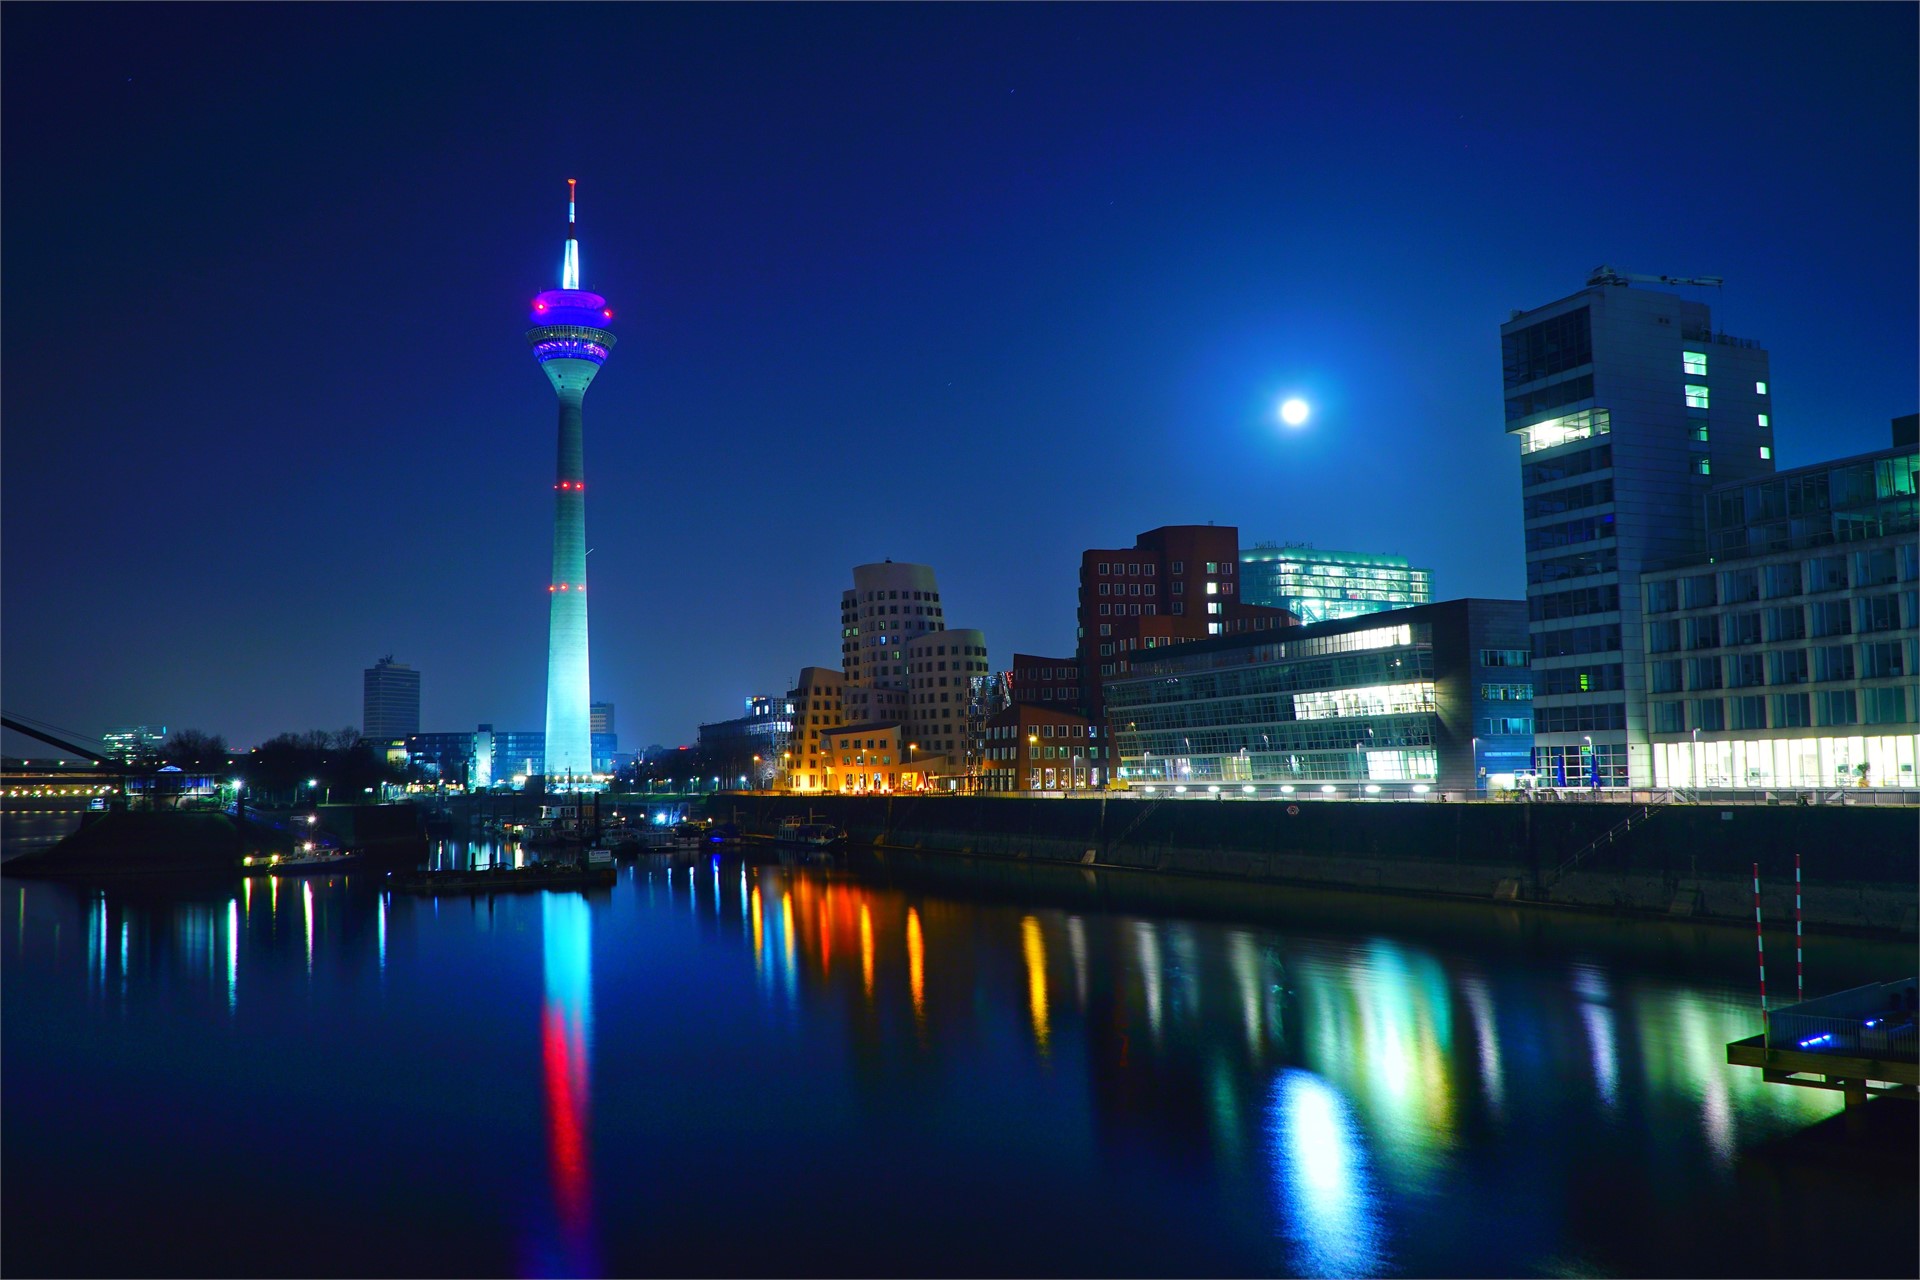 Hotels and accommodation in Düsseldorf, Germany